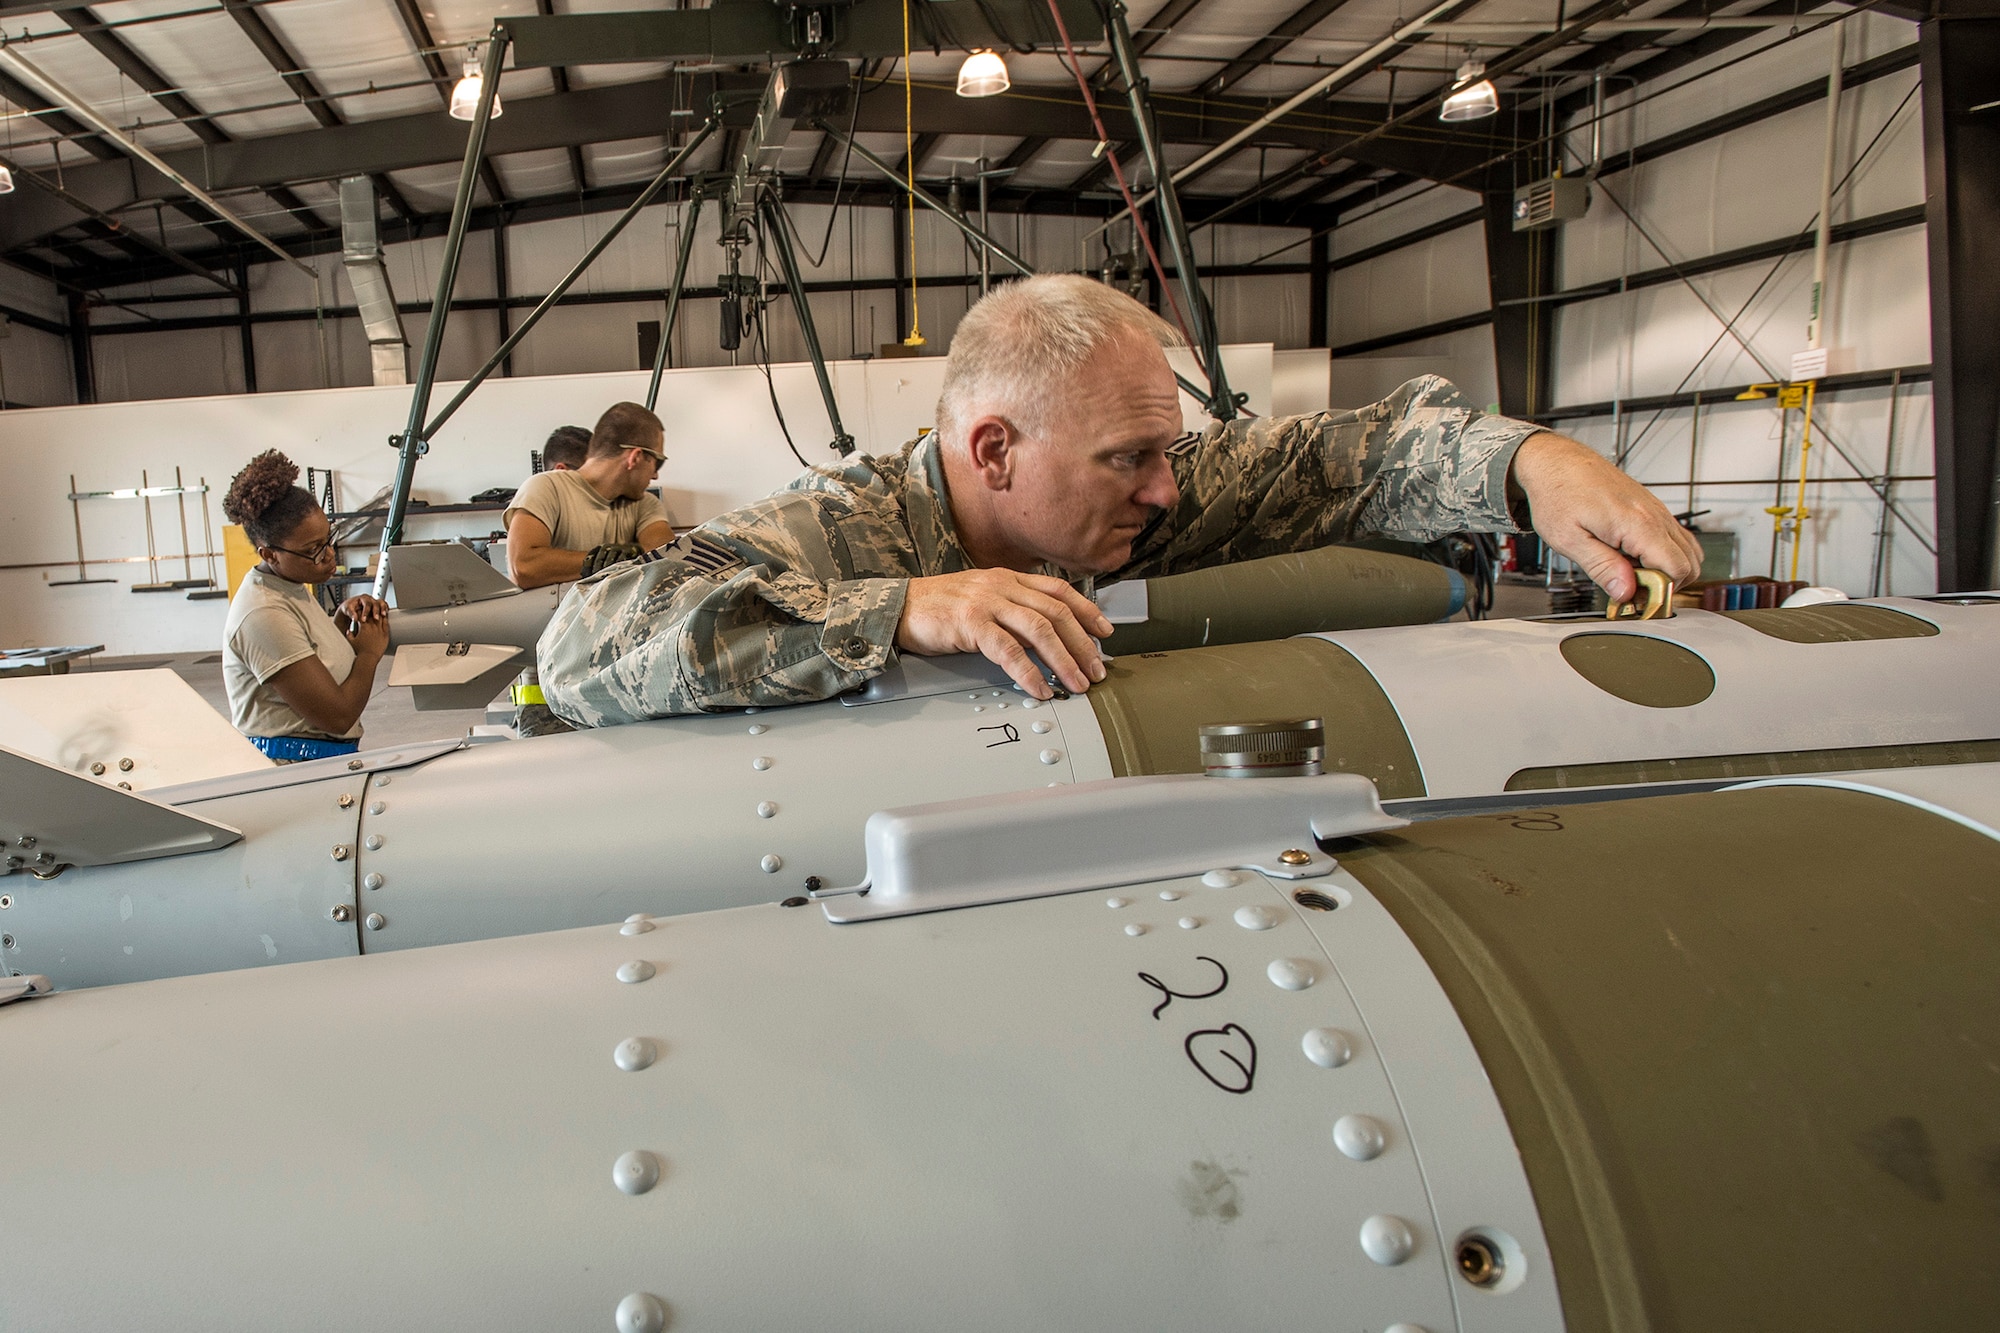 Tech Sgt. Anthony Mansell, an ammo evaluator with the 86th Fighter Weapons Squadron, checks the lugs on a GBU-32 bomb Aug. 2 at Hill AFB, Utah. The bombs will be dropped at the Utah Test and Training Range during the air-to-ground exercise known as Combat Hammer. Combat Hammer tests precision weapons for performance and suitability for combat. (U.S. Air Force photo by Paul Holcomb)